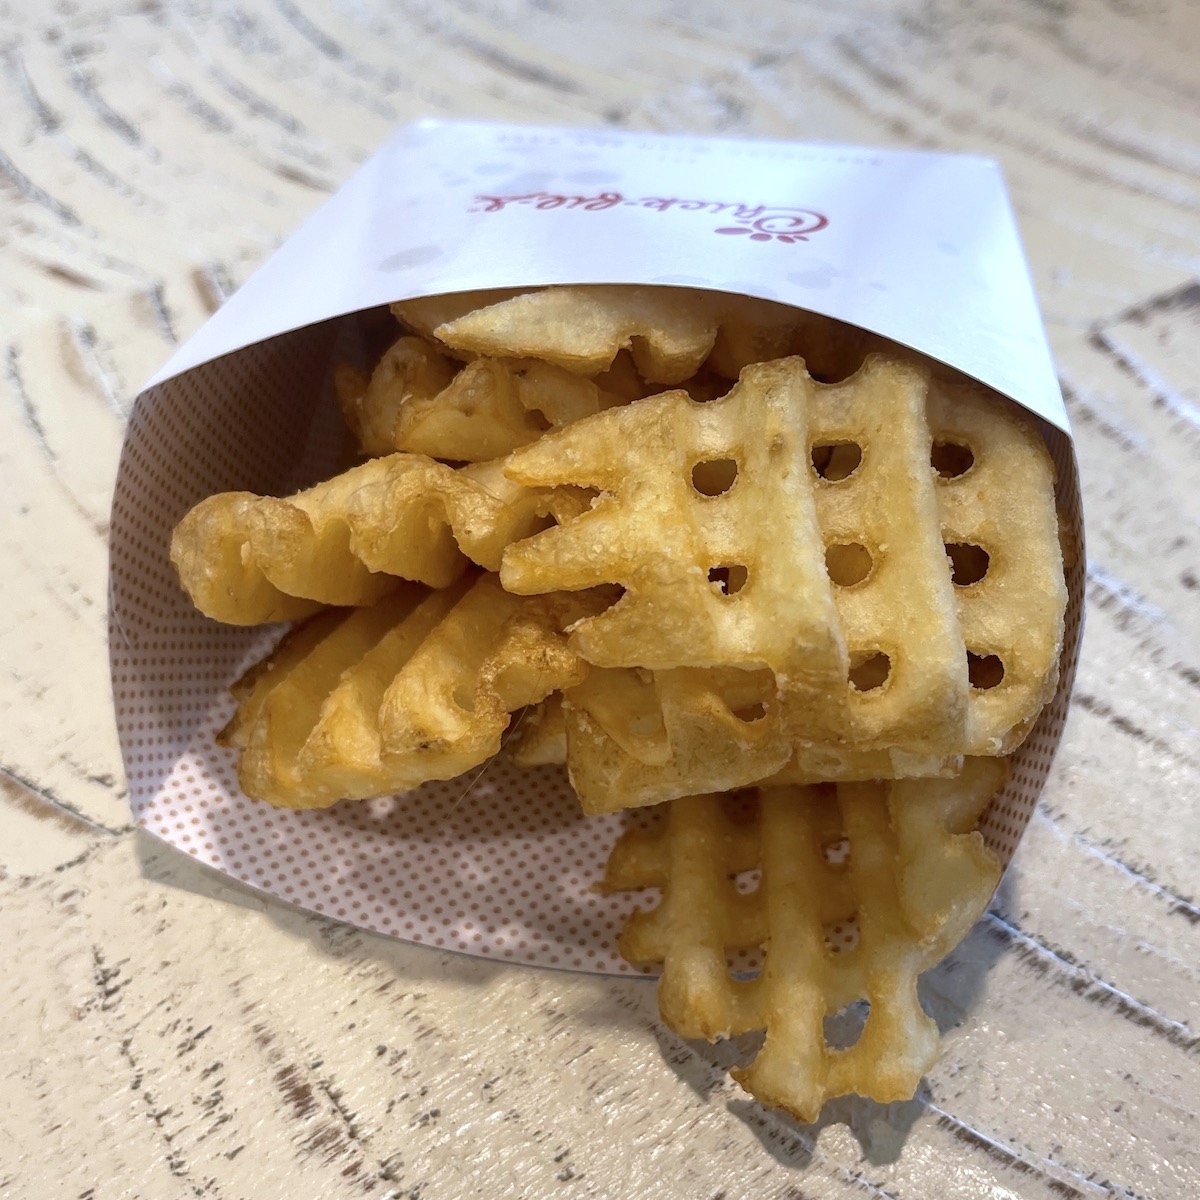 Waffle Fries from Chick-fil-A in Hialeah, Florida